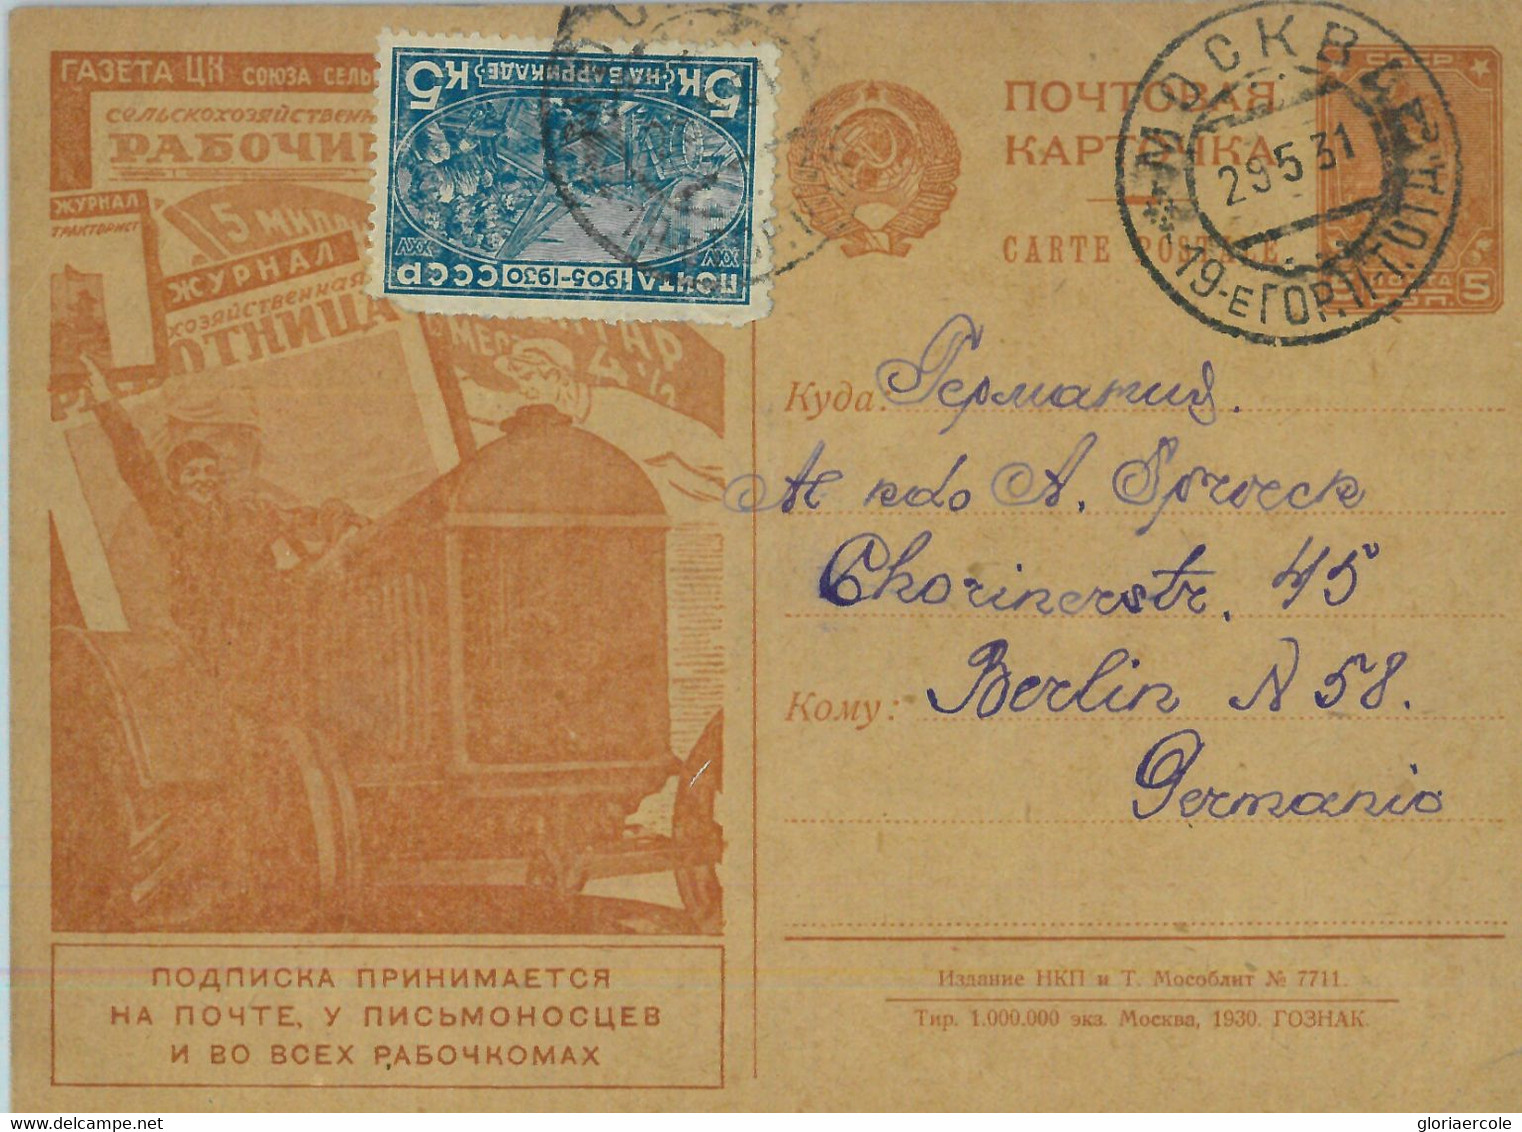 93376  - USSR Russia - POSTAL STATIONERY COVER  - CARS  TRANSPORT  1931 - ...-1949